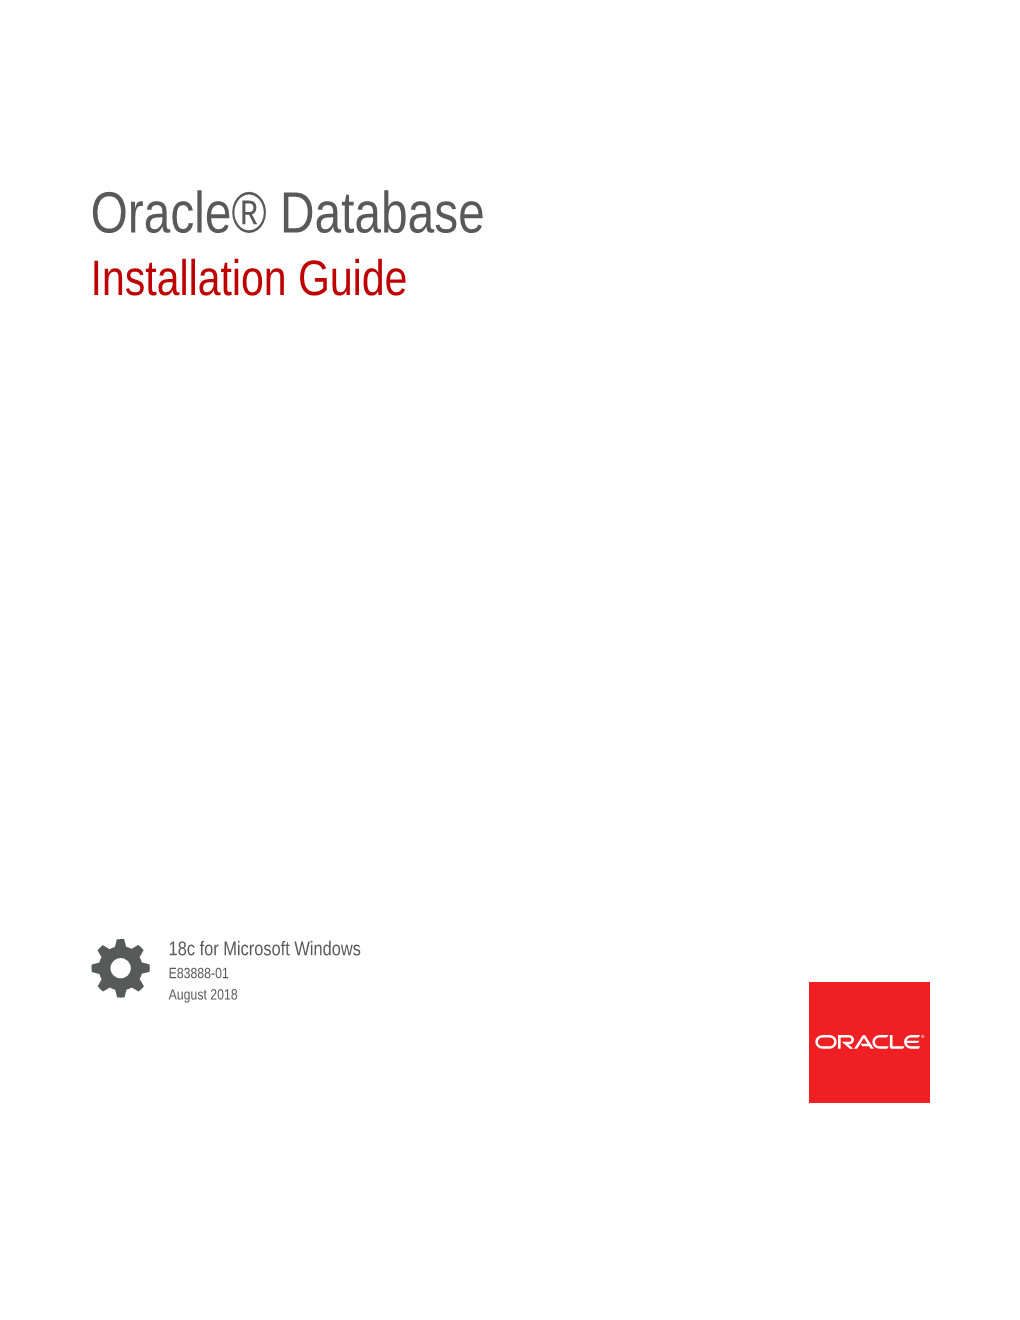 Oracle® Database Installation Guide